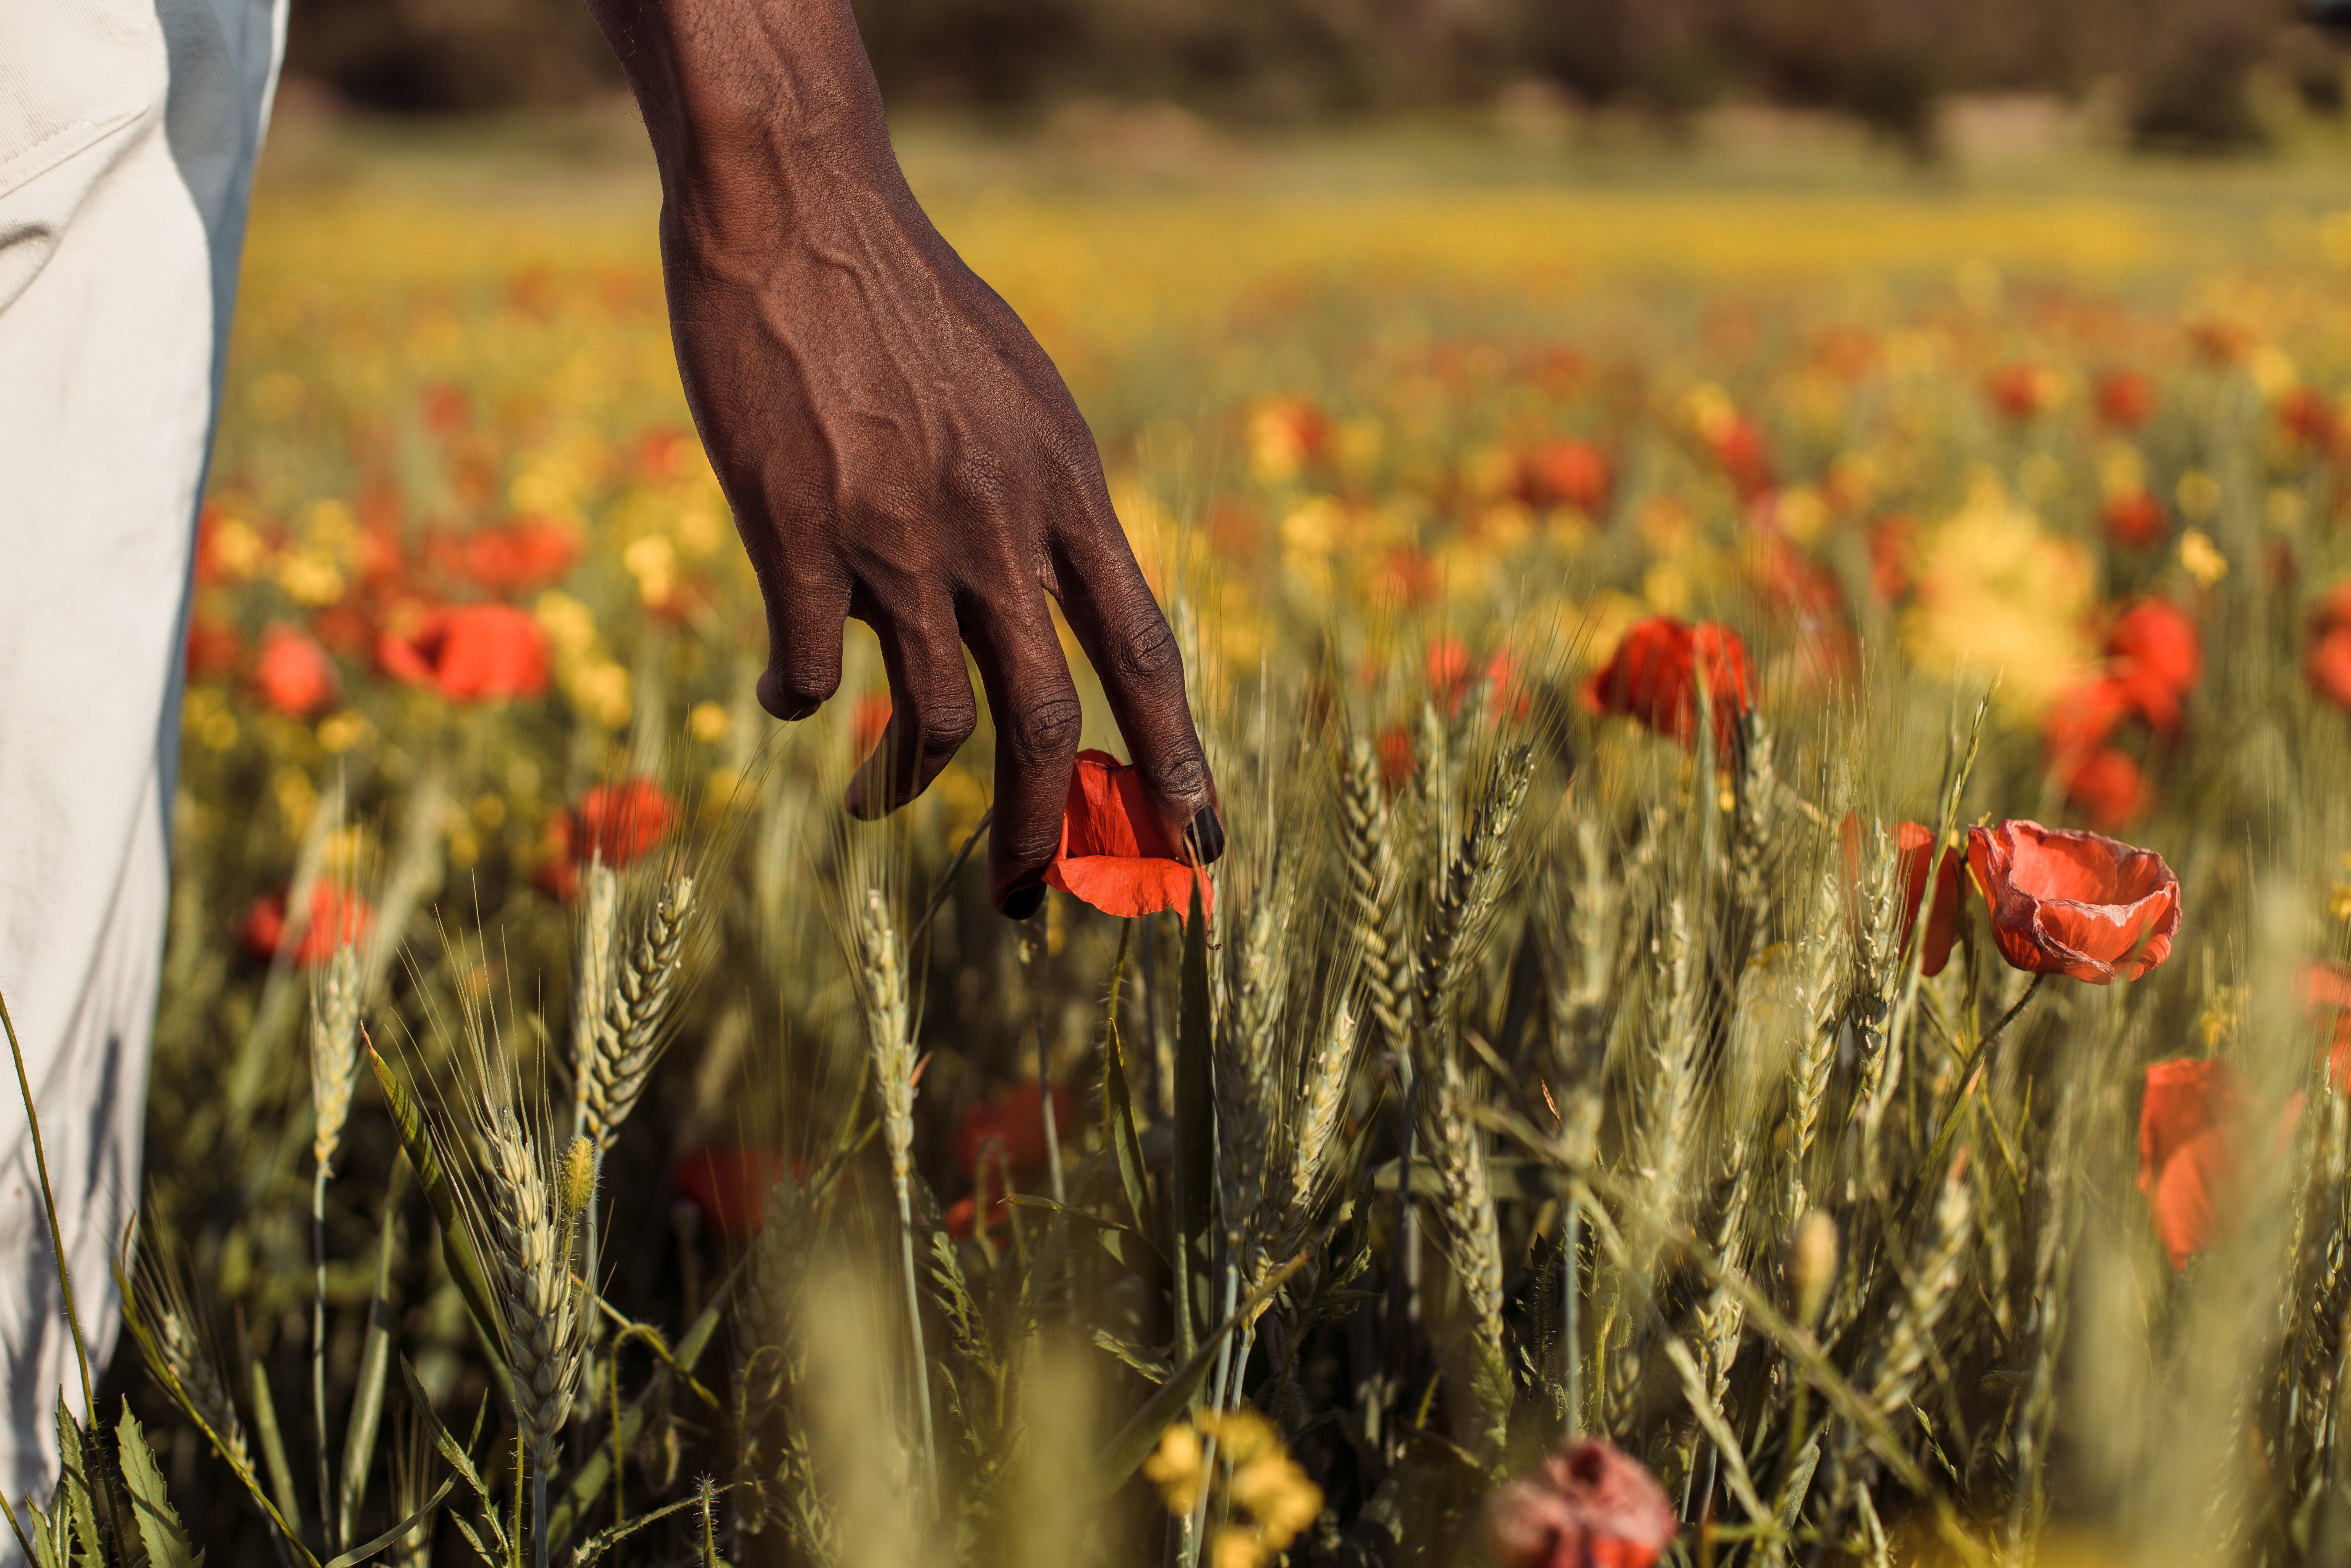 Touching Flowers Close up of the hand of a black man touching poppies in a flower field.